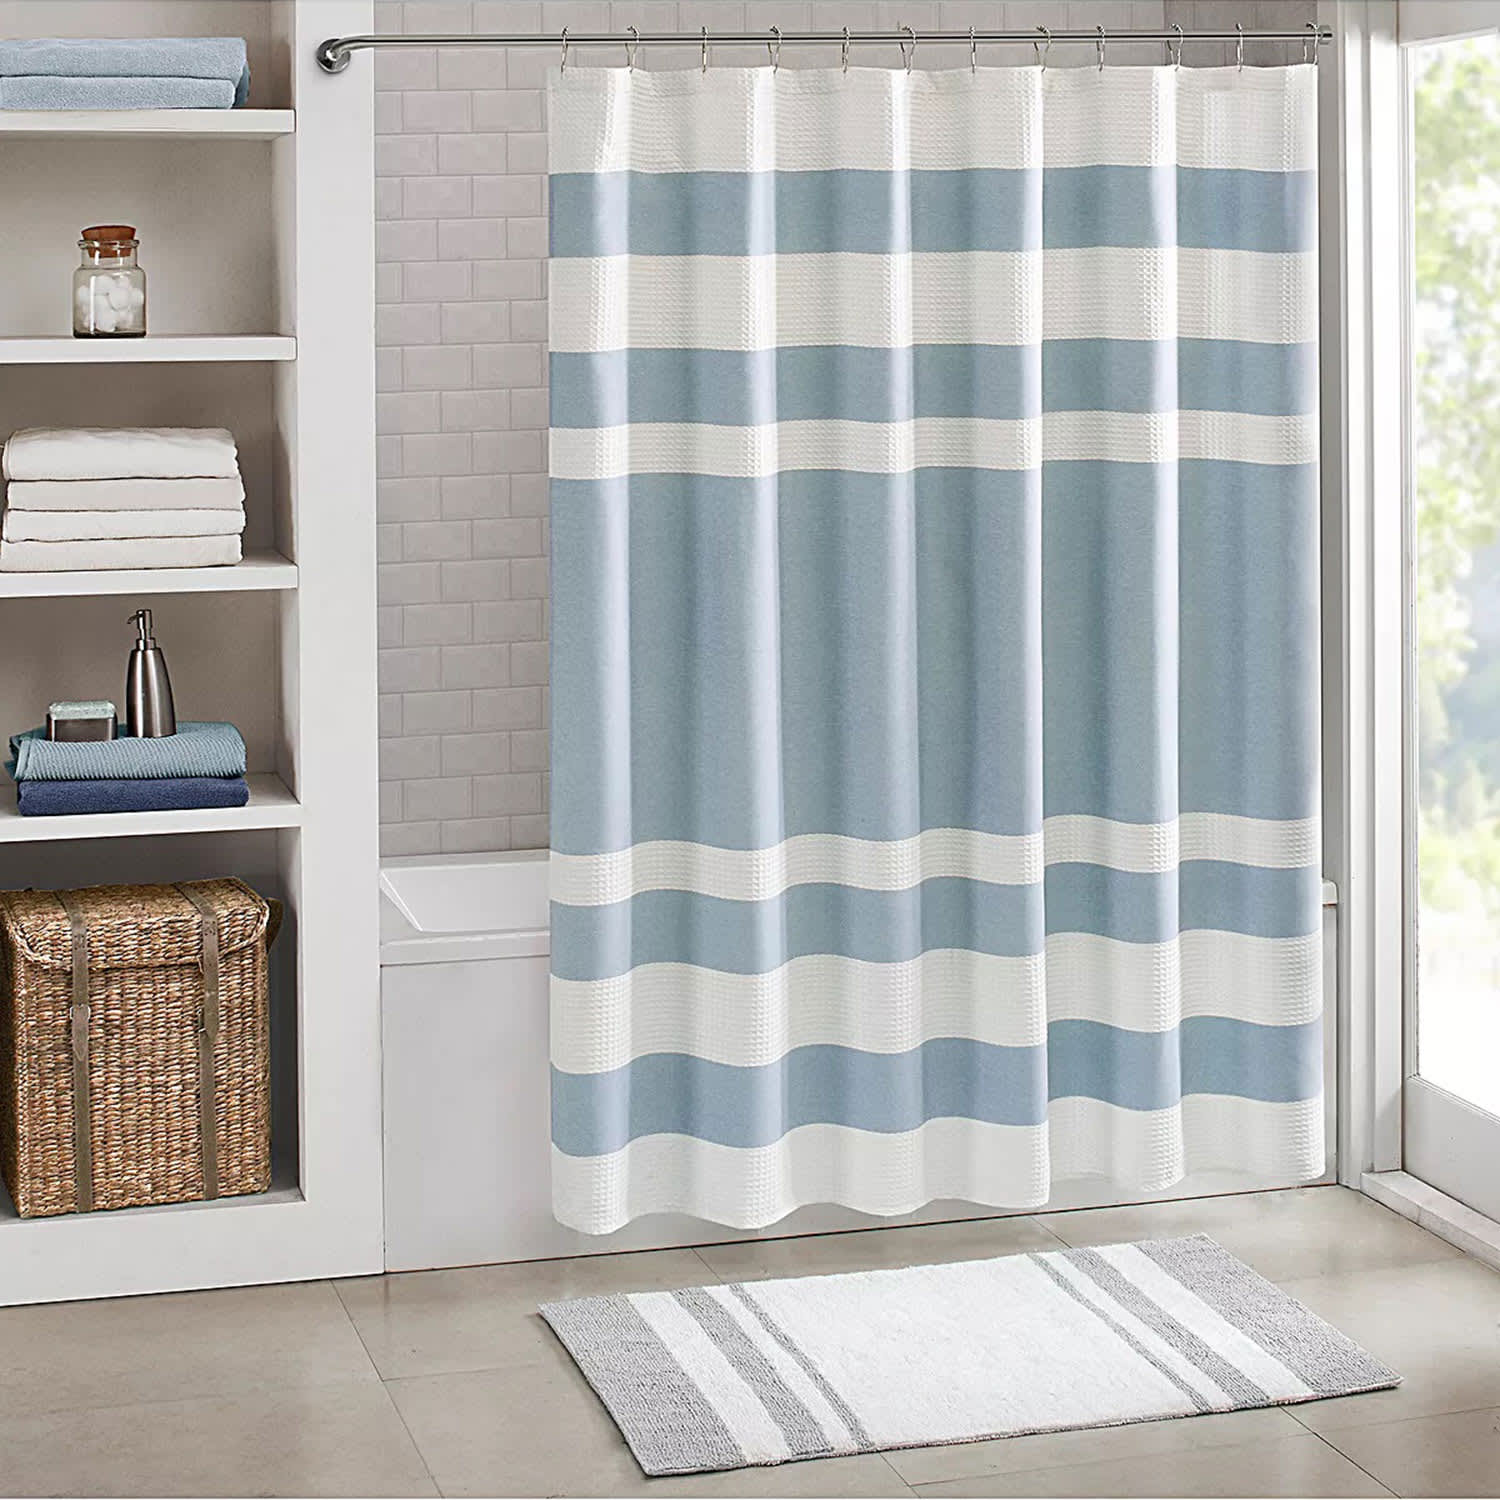 The Best Shower Curtains for Popular Types of Showers and Tubs